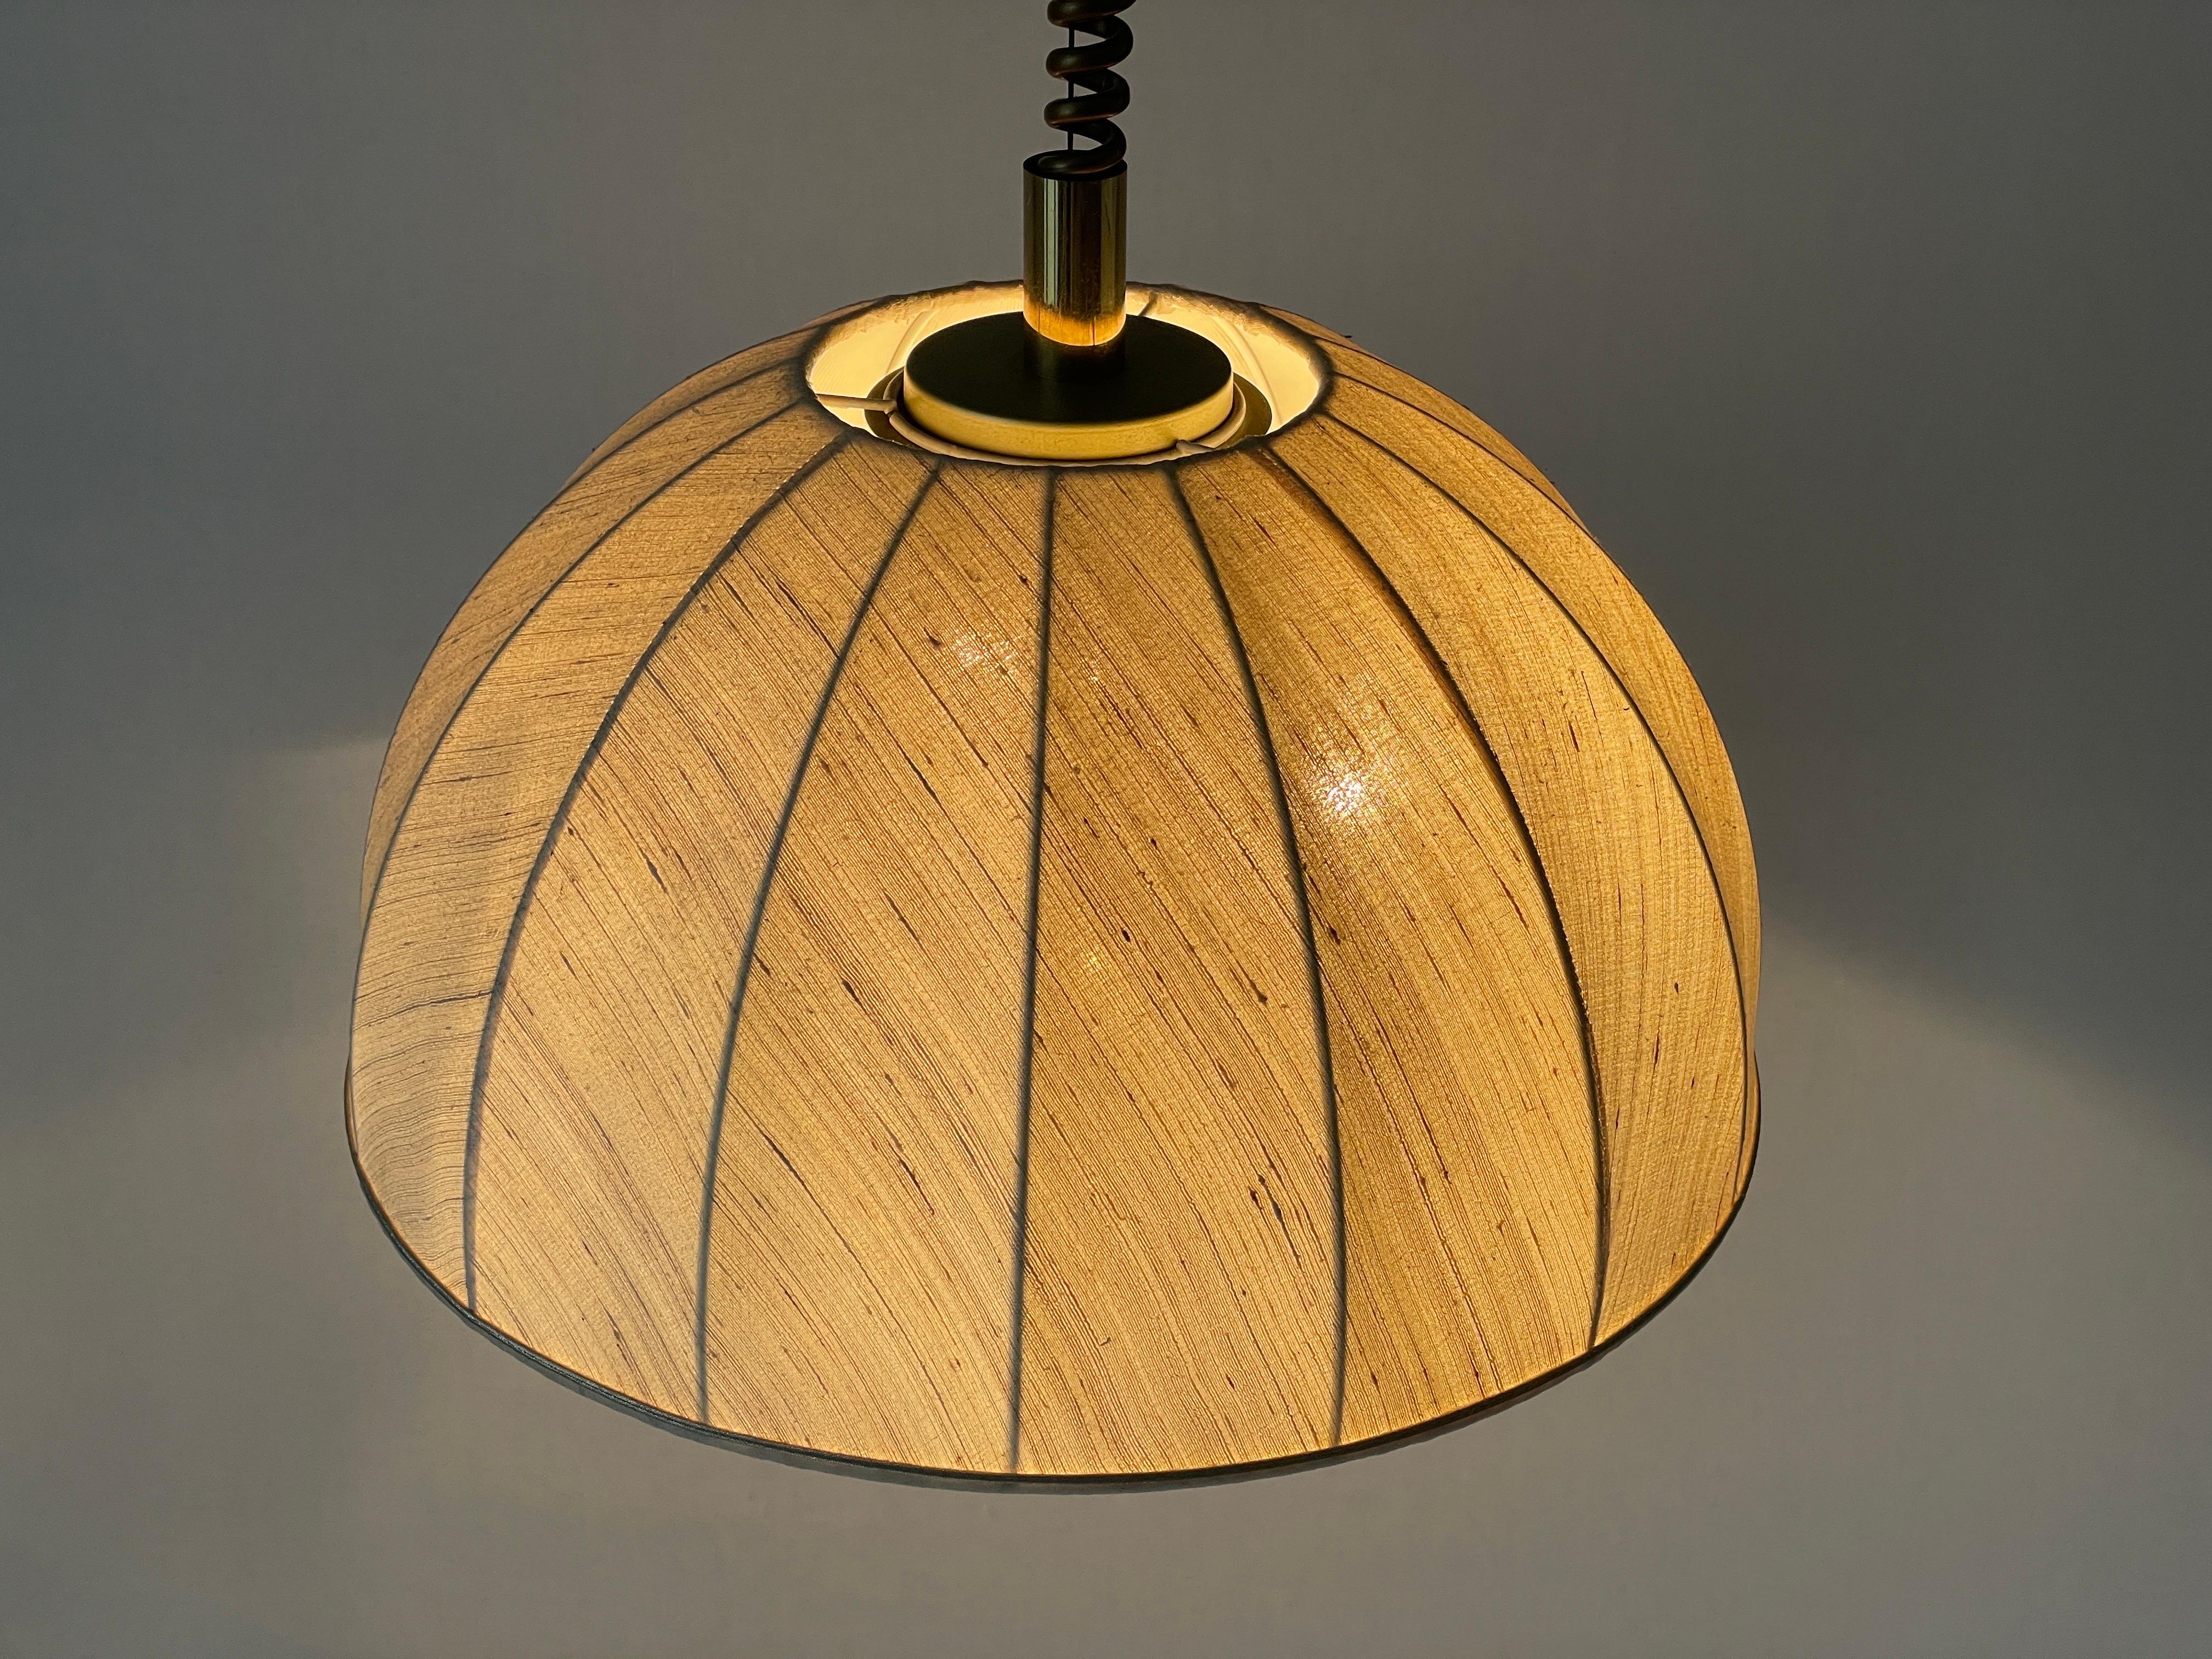 Fabric and Brass 3 socket Adjustable Shade Pendant Lamp by WKR, 1970s, Germany For Sale 8